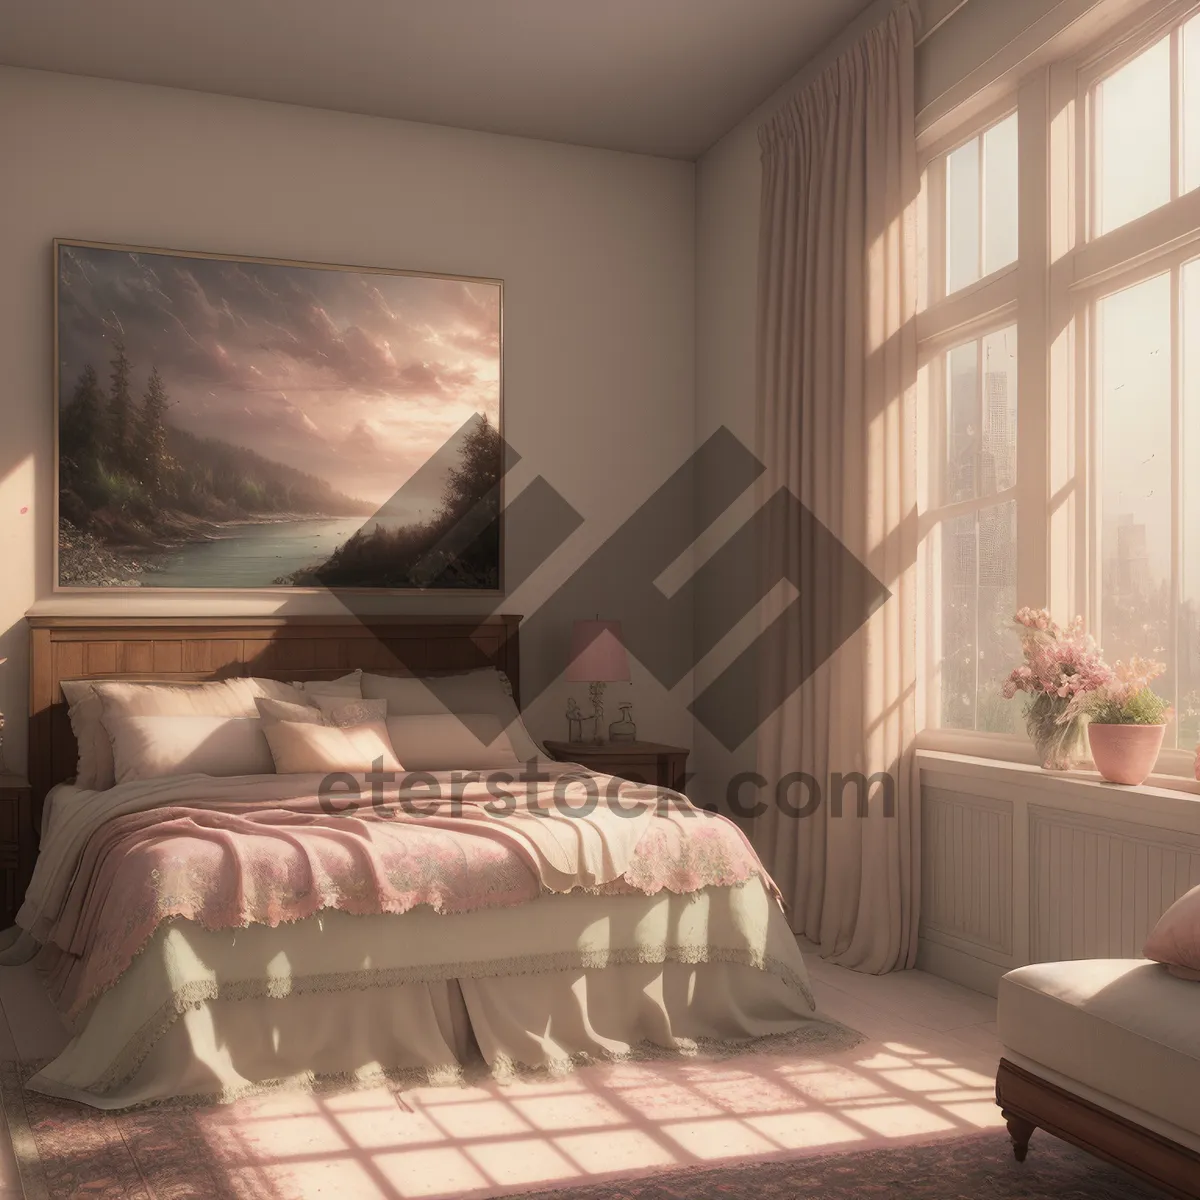 Picture of Modern Bedroom with Stylish Furniture and Cozy Lighting